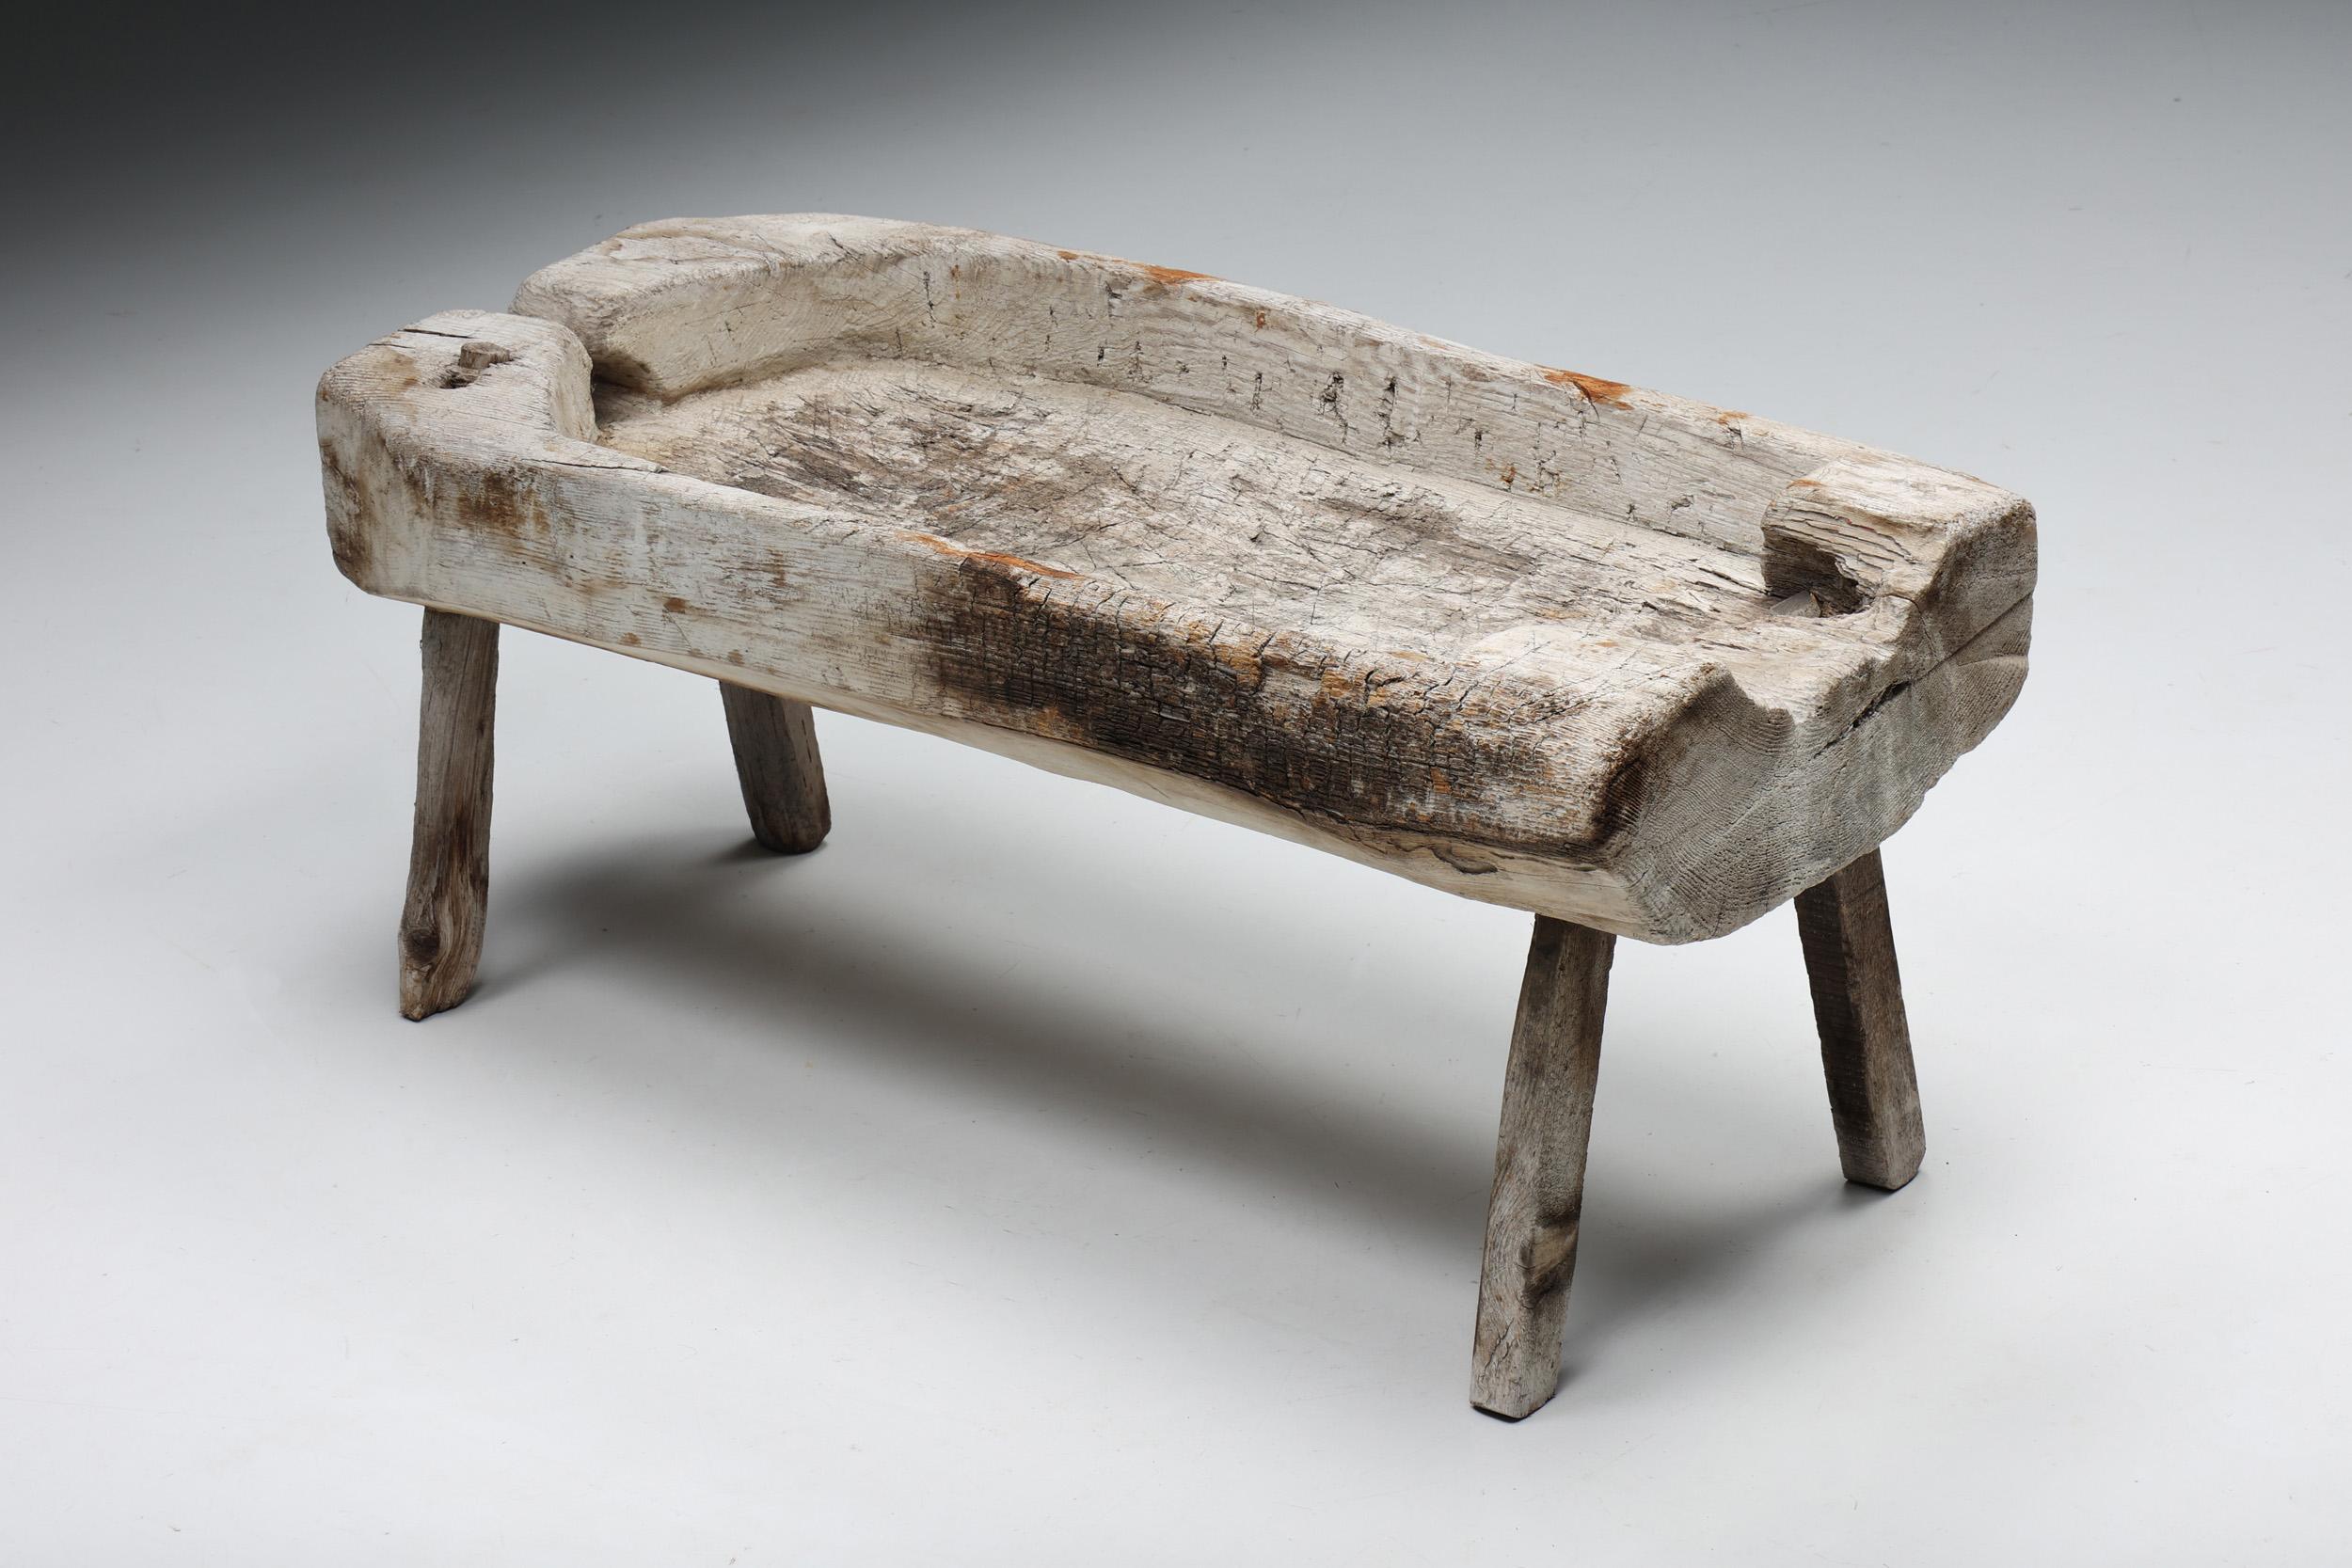 Wabi Sabi; Rustic; Drinking Trough; France; 1950s; Mid-Century Modern; 

A rustic wabi-sabi wooden drinking trough made out of wood. The design reminds us of the wabi-sabi philosophy which centres around the appreciation of the beauty of natural